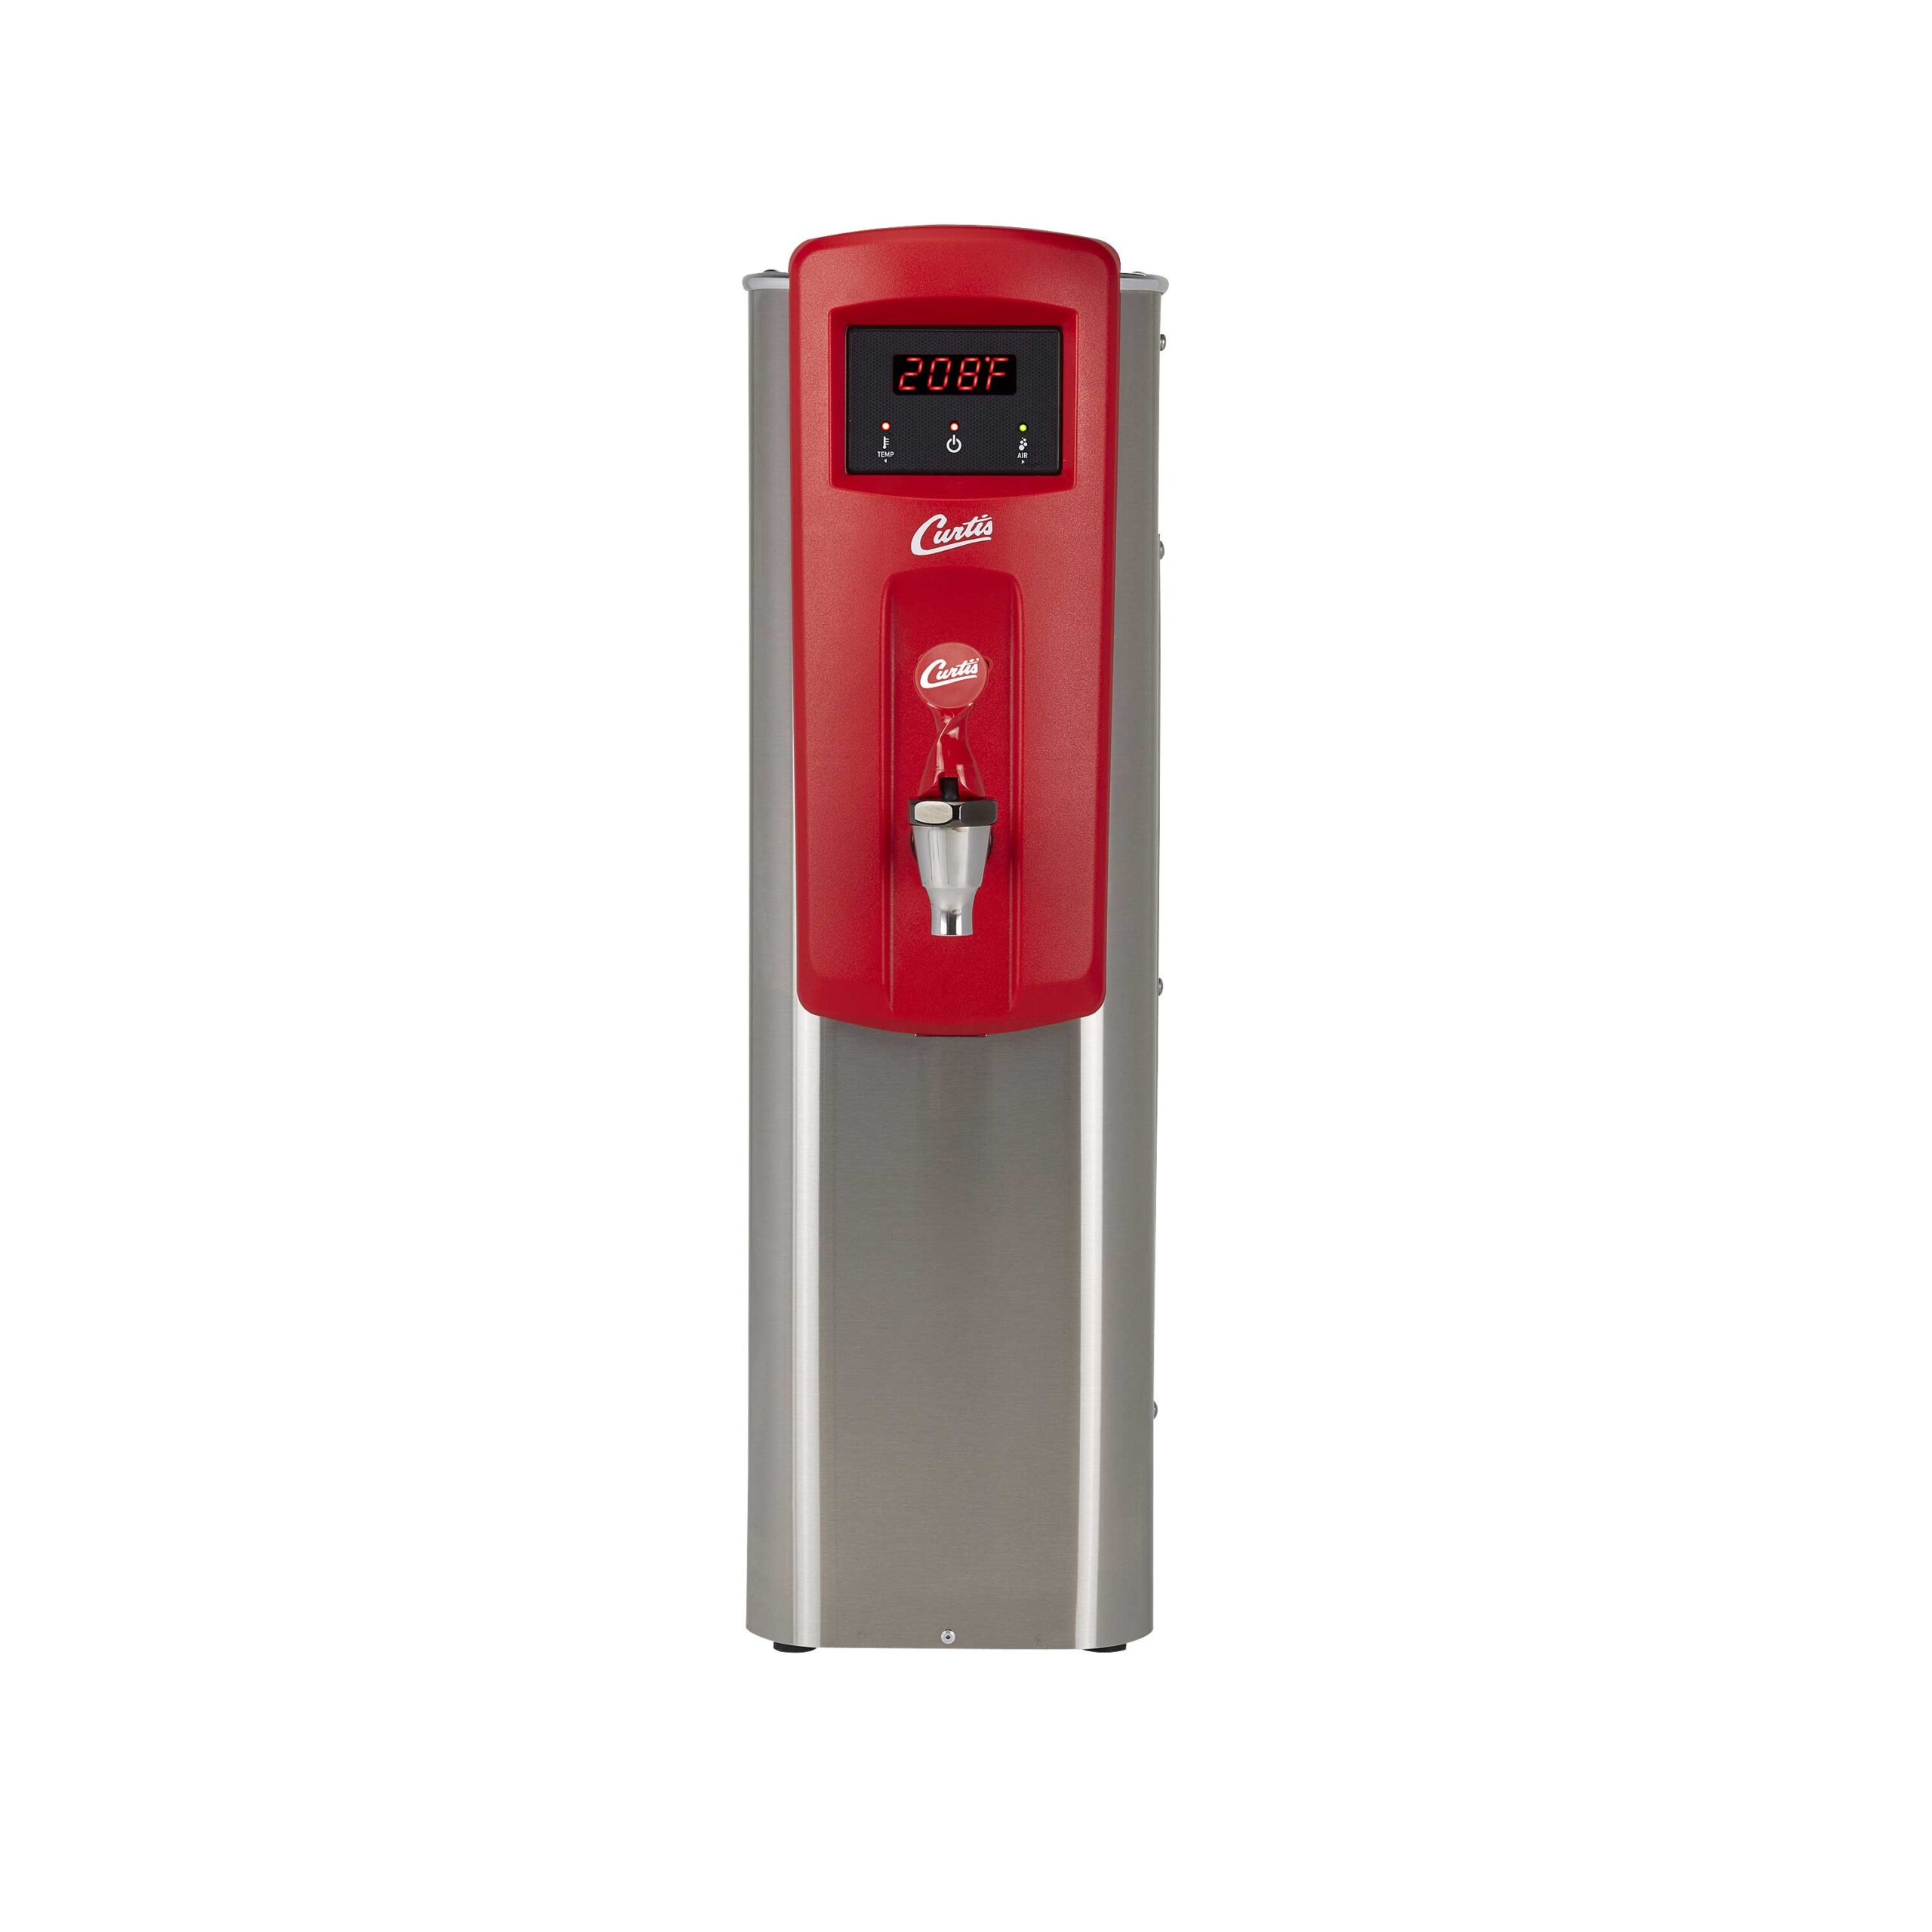 Curtis G3 Electric Hot Water Dispenser with Aerator